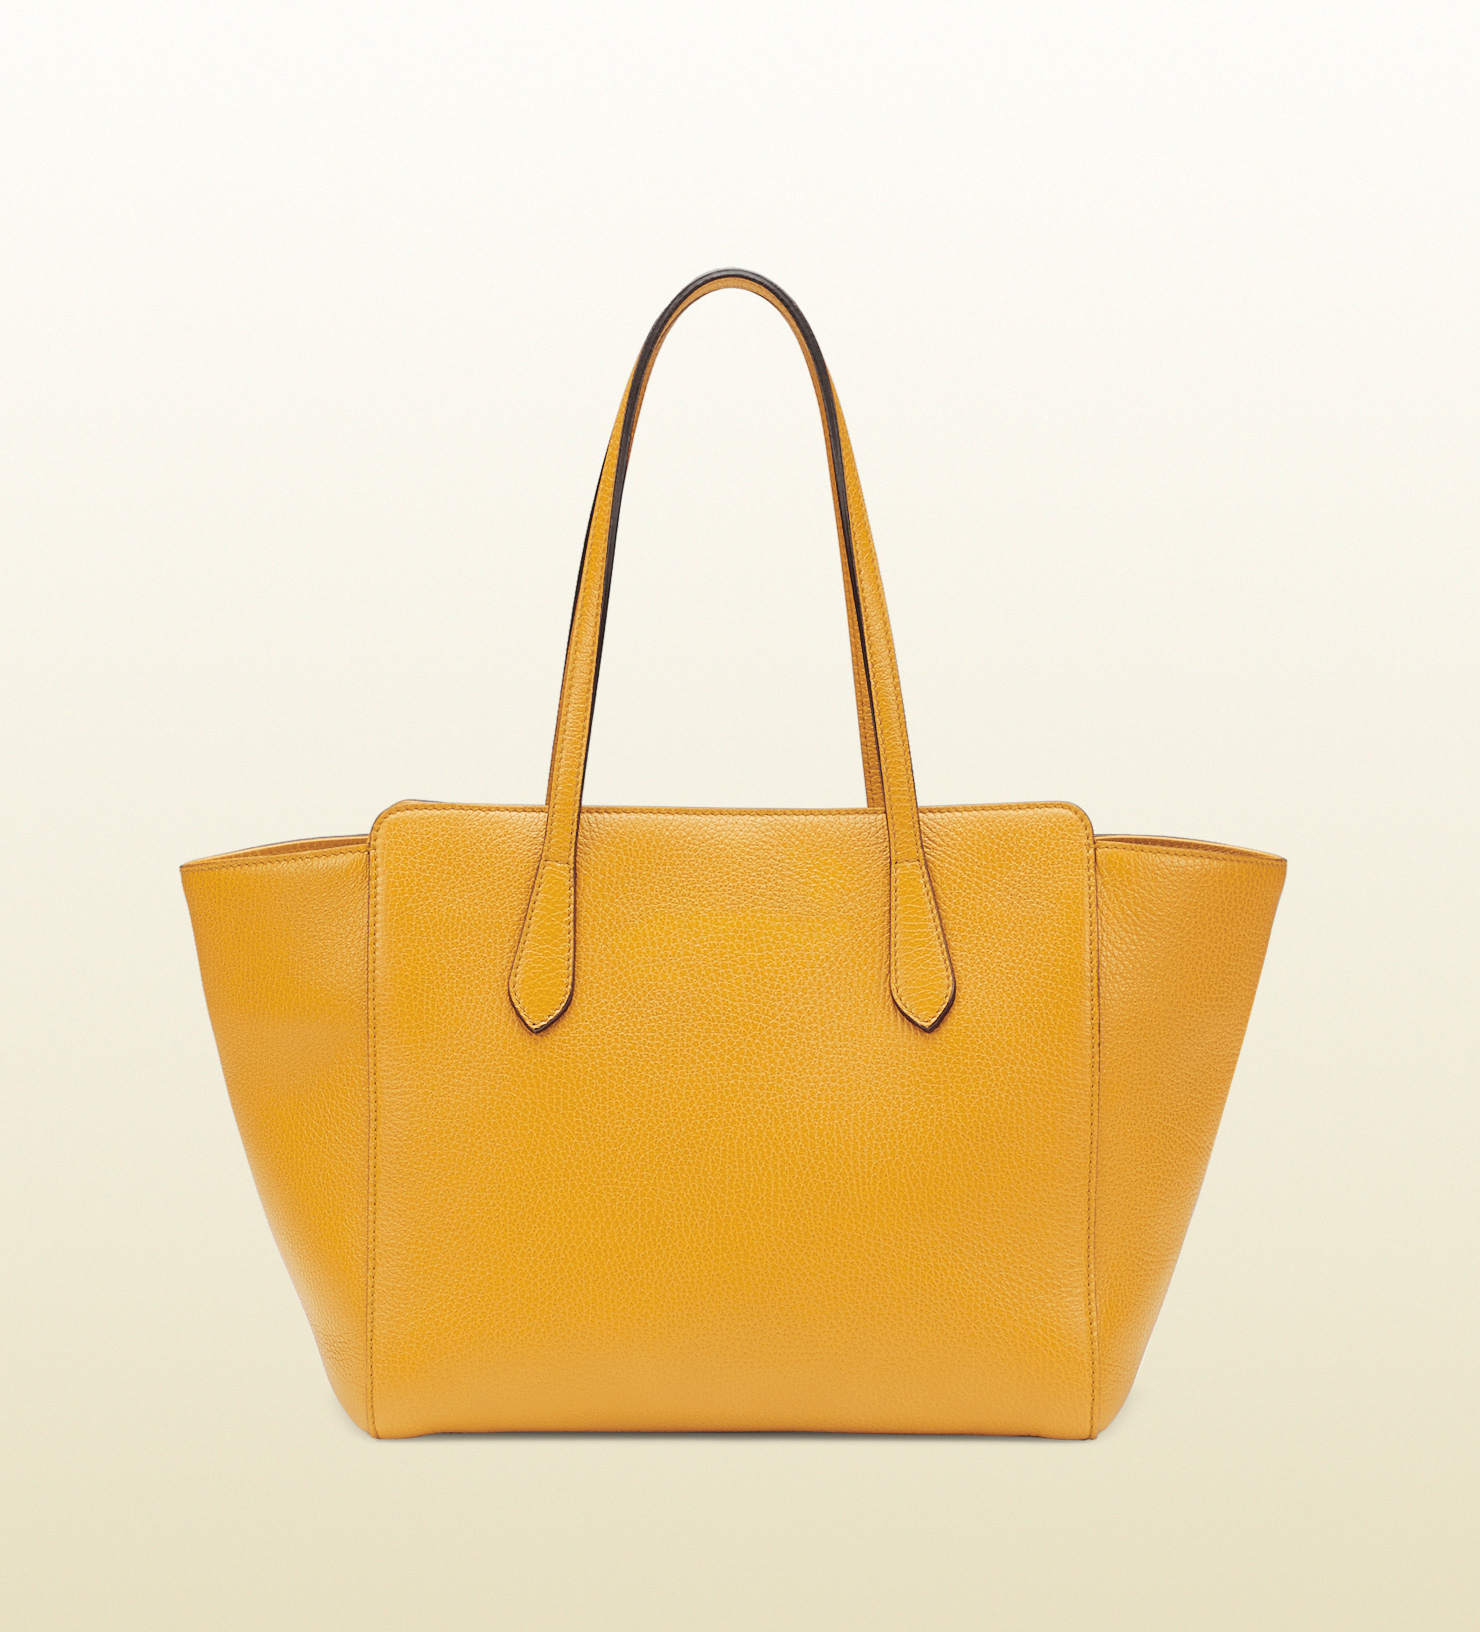 Gucci Swing Leather Tote in Yellow - Lyst